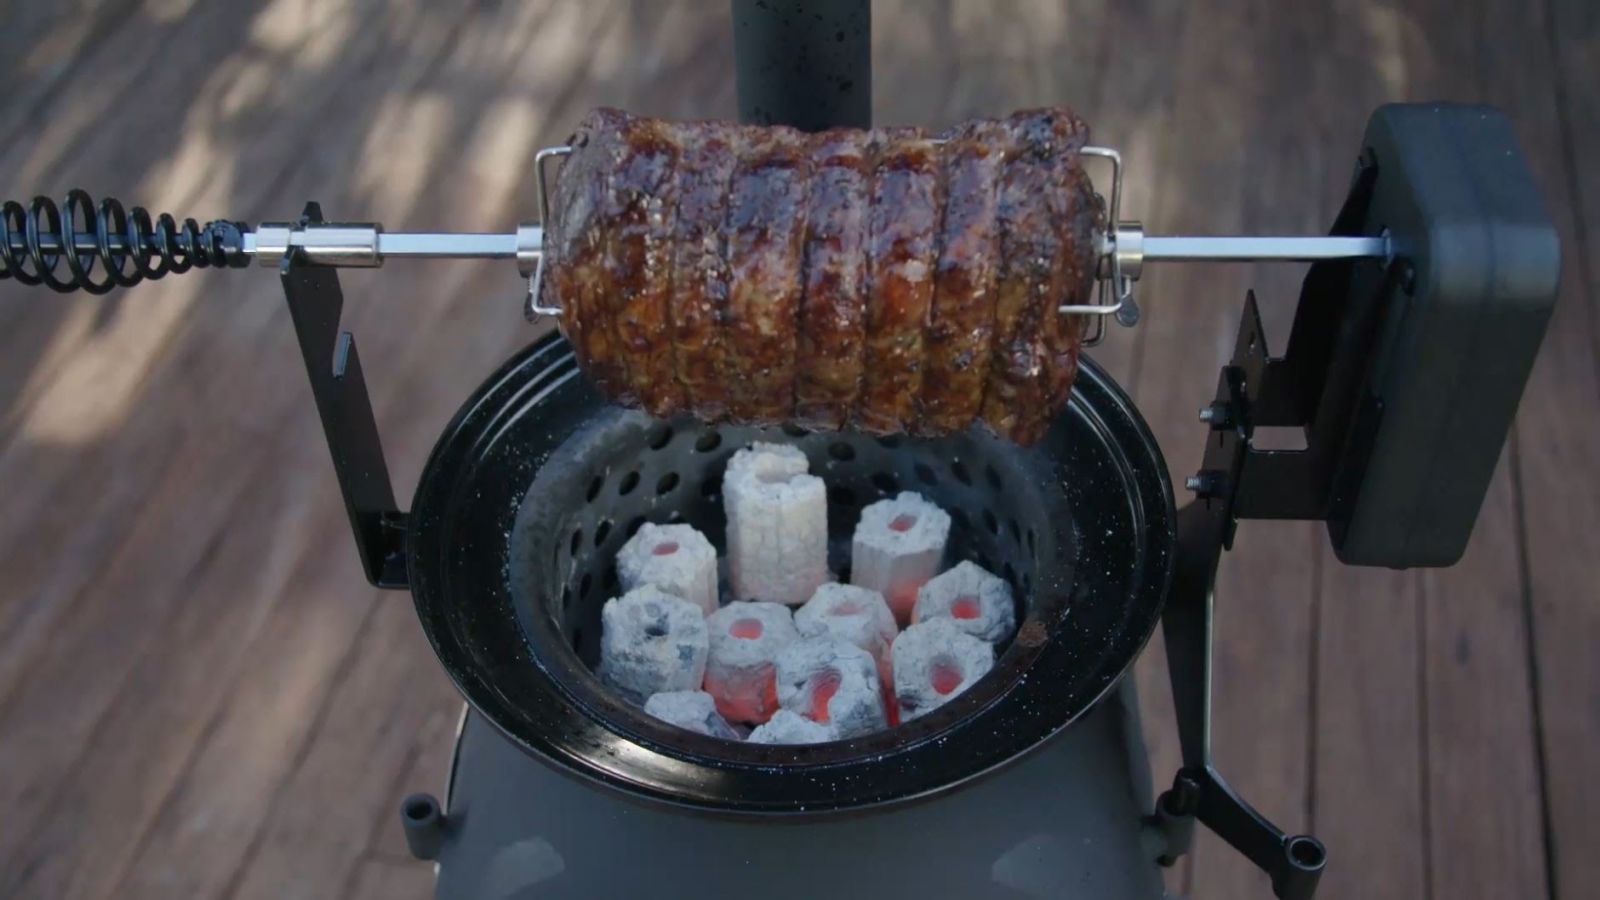 This is an image on a spit roast being cooked on top of an ozpig